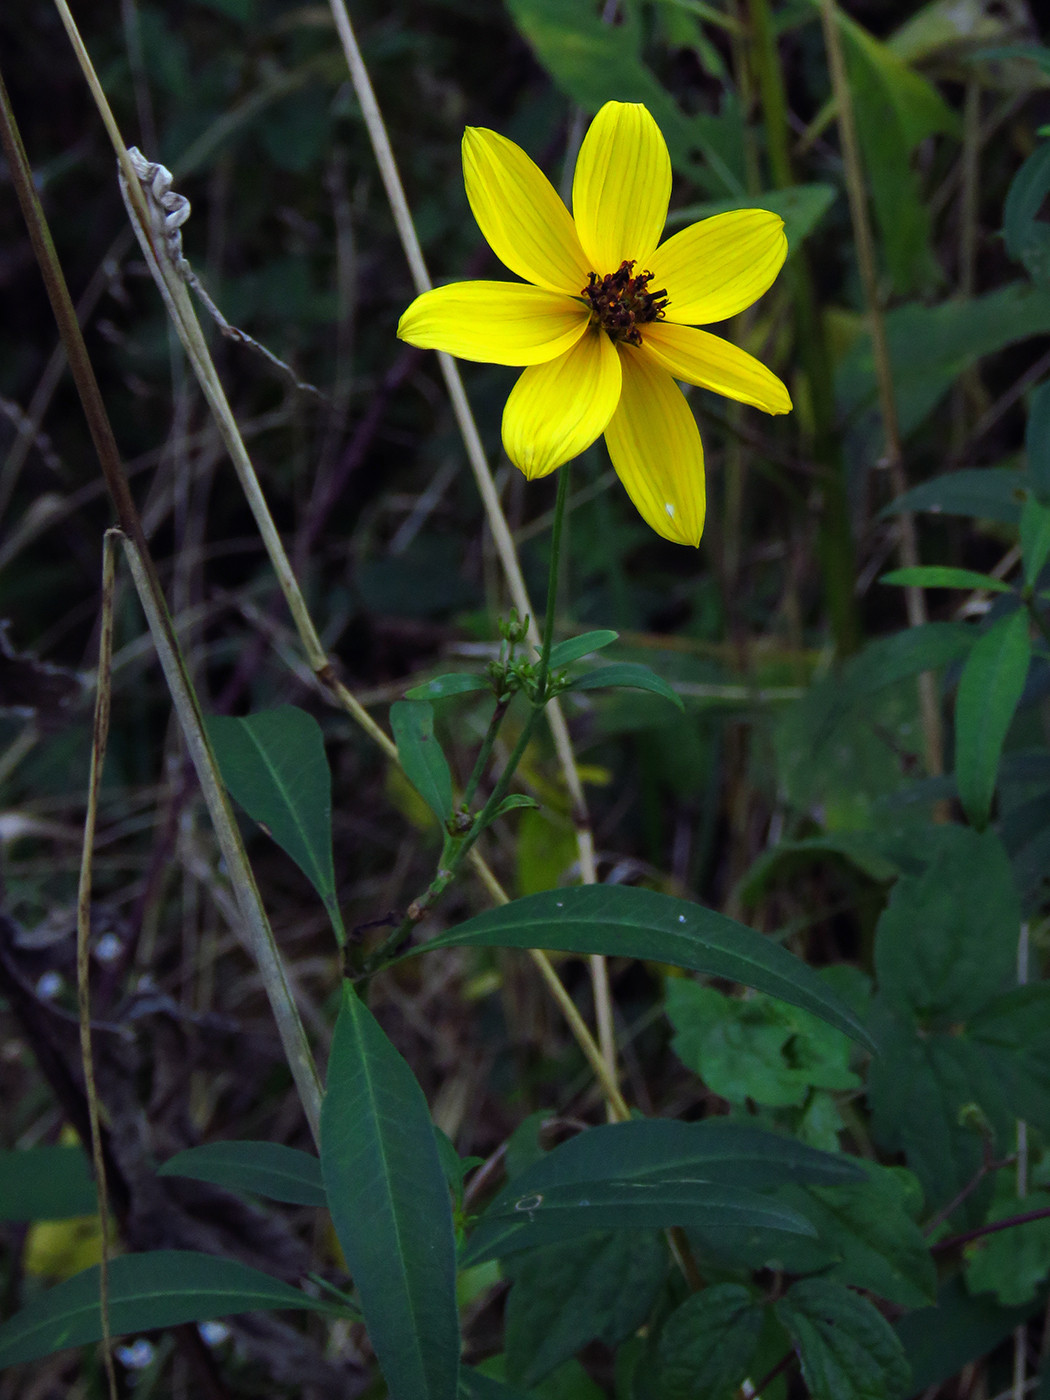 The Scientific Name is Coreopsis tripteris. You will likely hear them called Tall Coreopsis, Golden Crown, Tall Tickseed. This picture shows the Plants bloom for about a month from mid to late summer into the autumn. of Coreopsis tripteris